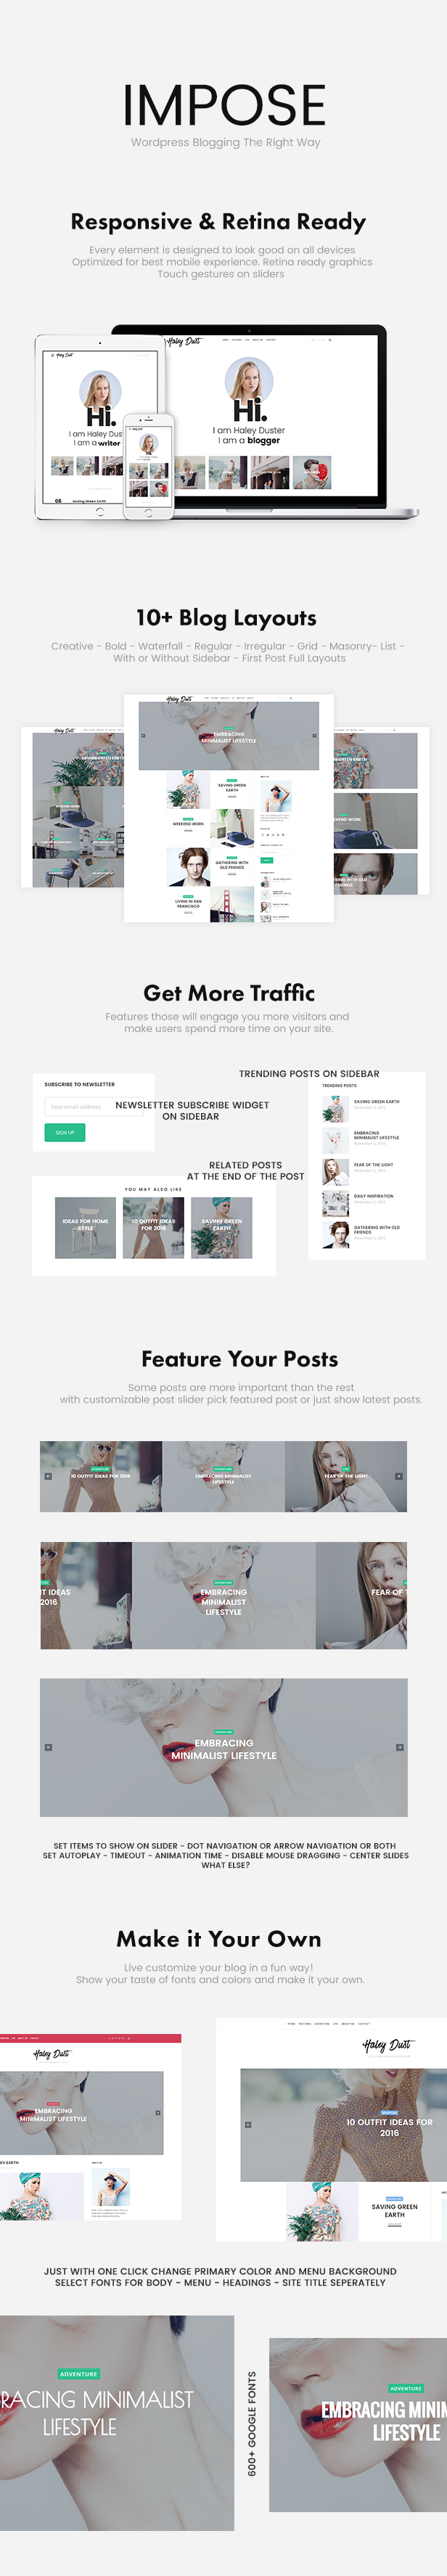 impose blog theme features